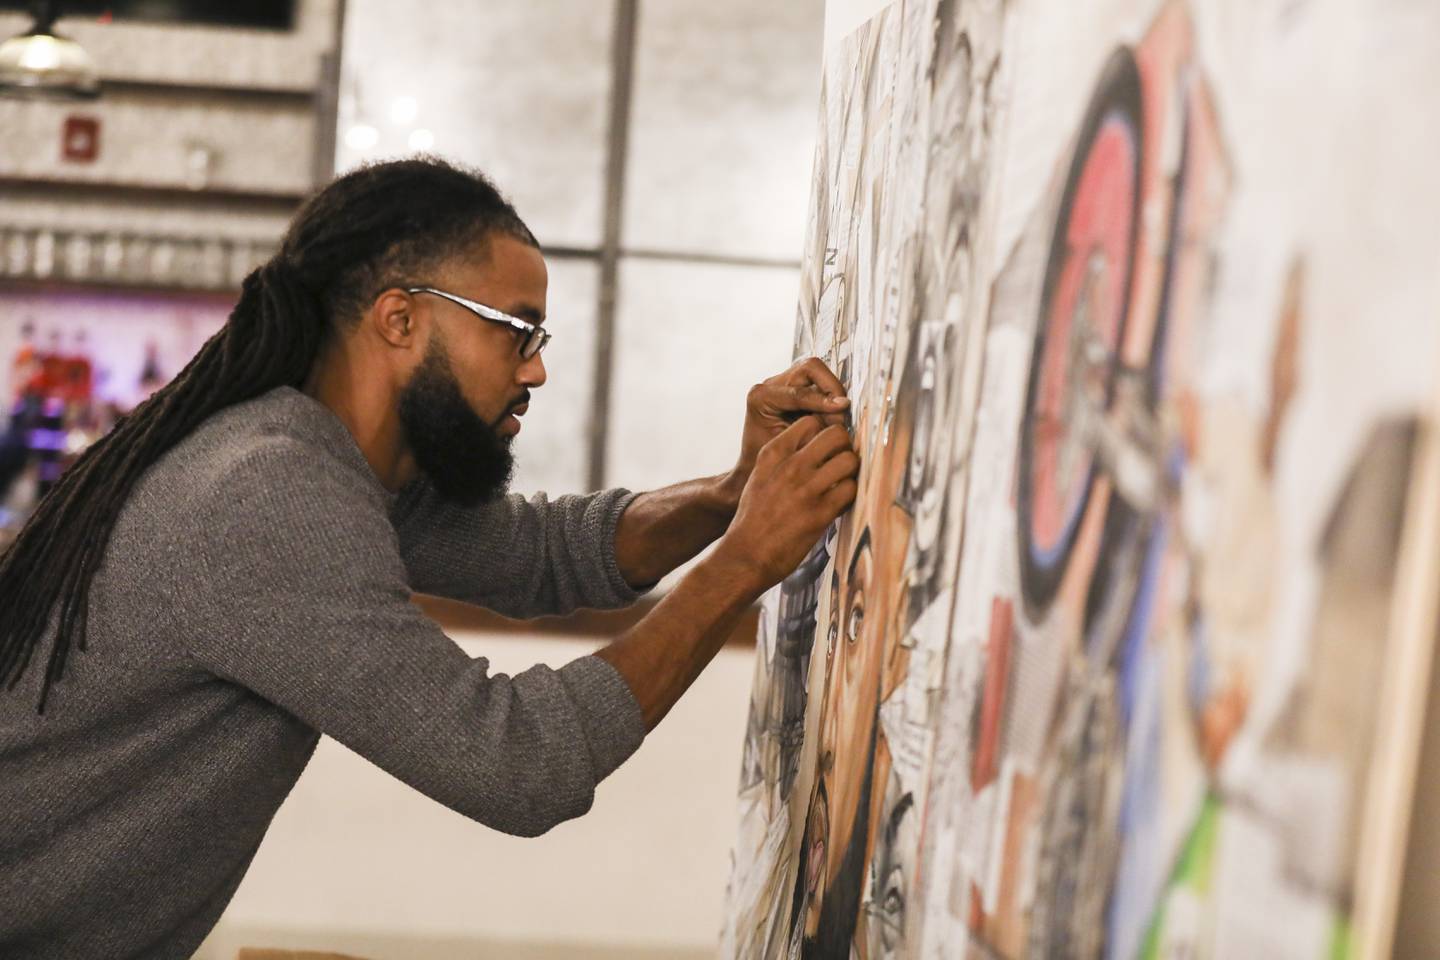 Former NFL Linebacker Aaron Maybin hosts a show of his various artworks titled "Diary of a Mad Black Artist" featuring paintings and mixed media pieces.